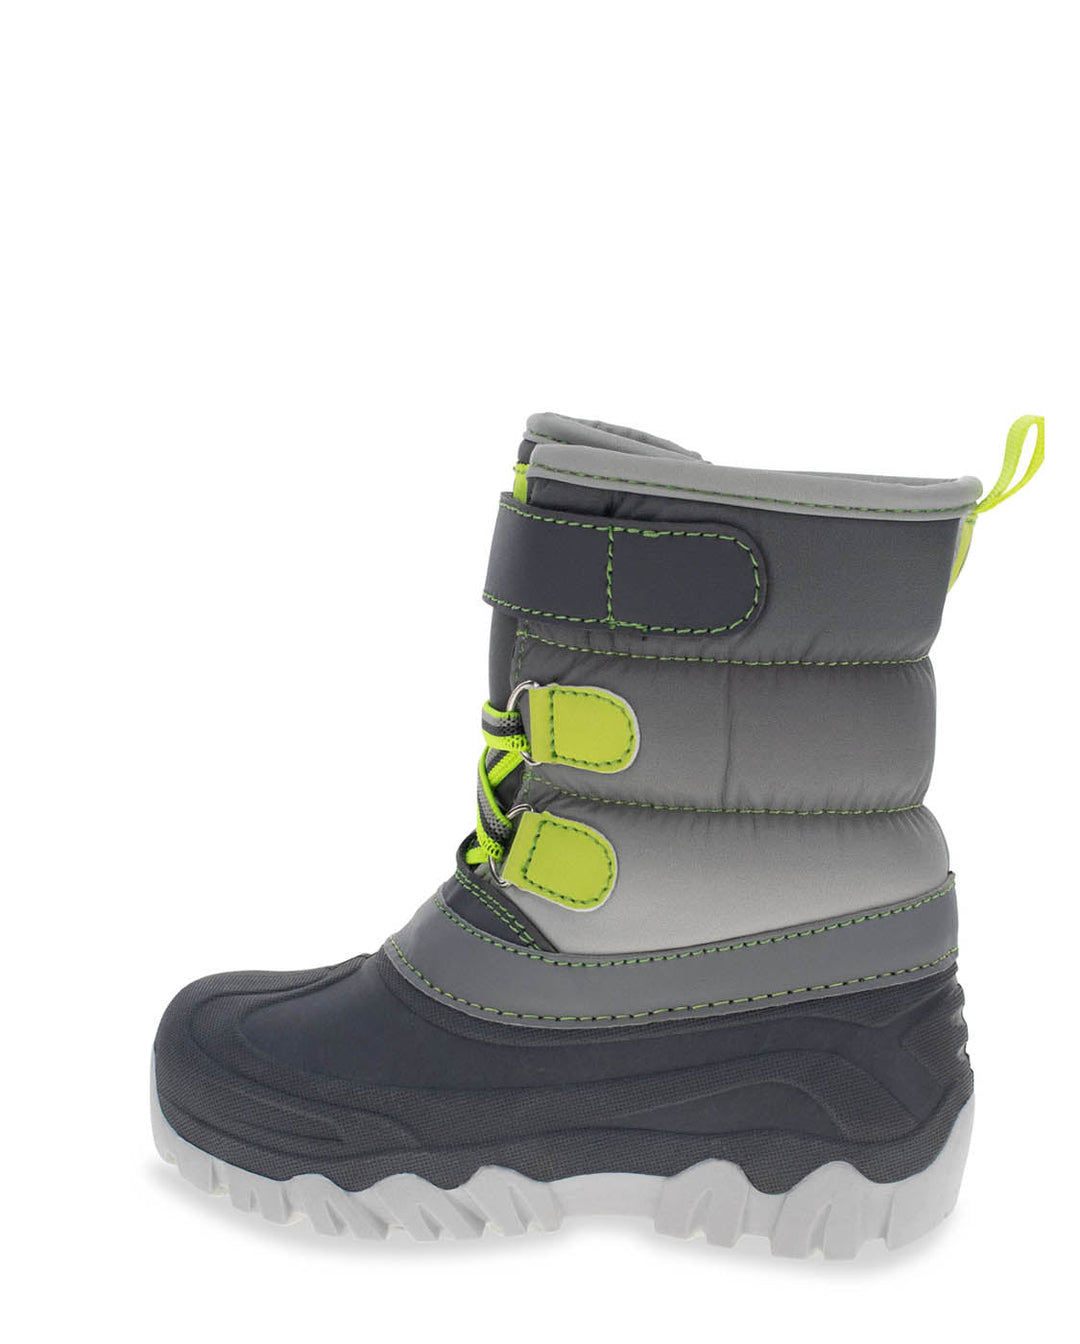 NEW Kids Ascend Cold Weather Boot - Charcoal - WSC B2B